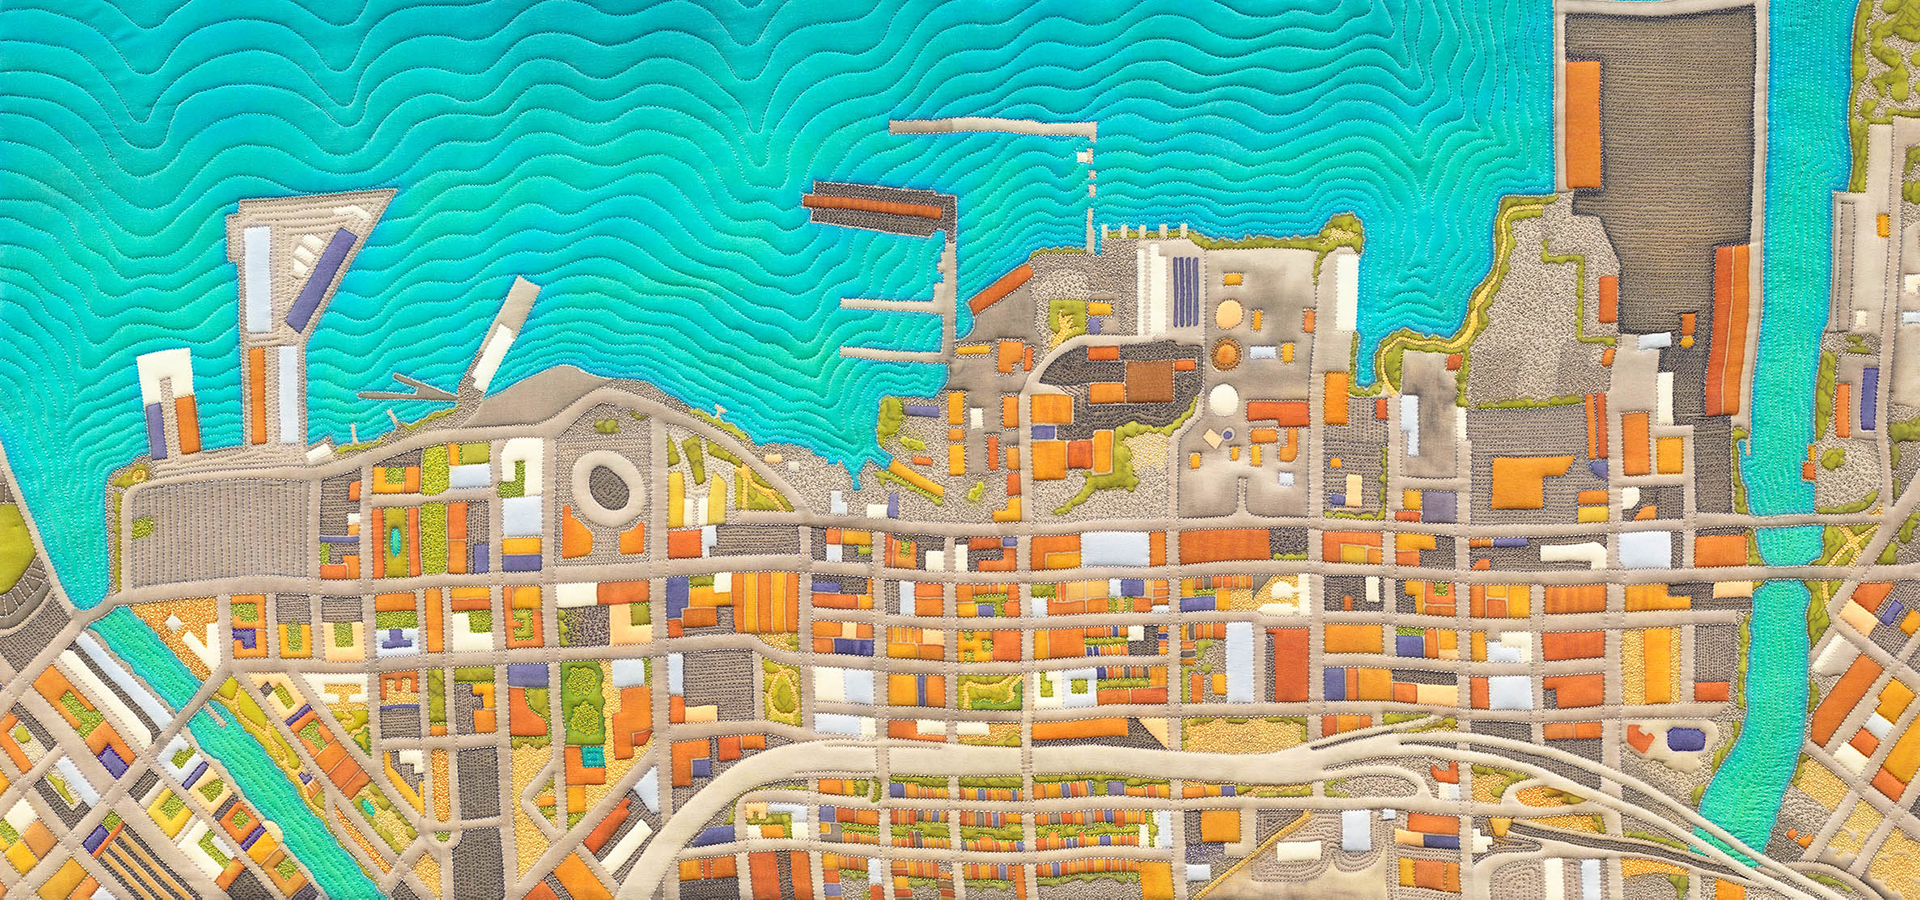 Embroidered, quilted map of San Francisco's Dogpatch neighborhood